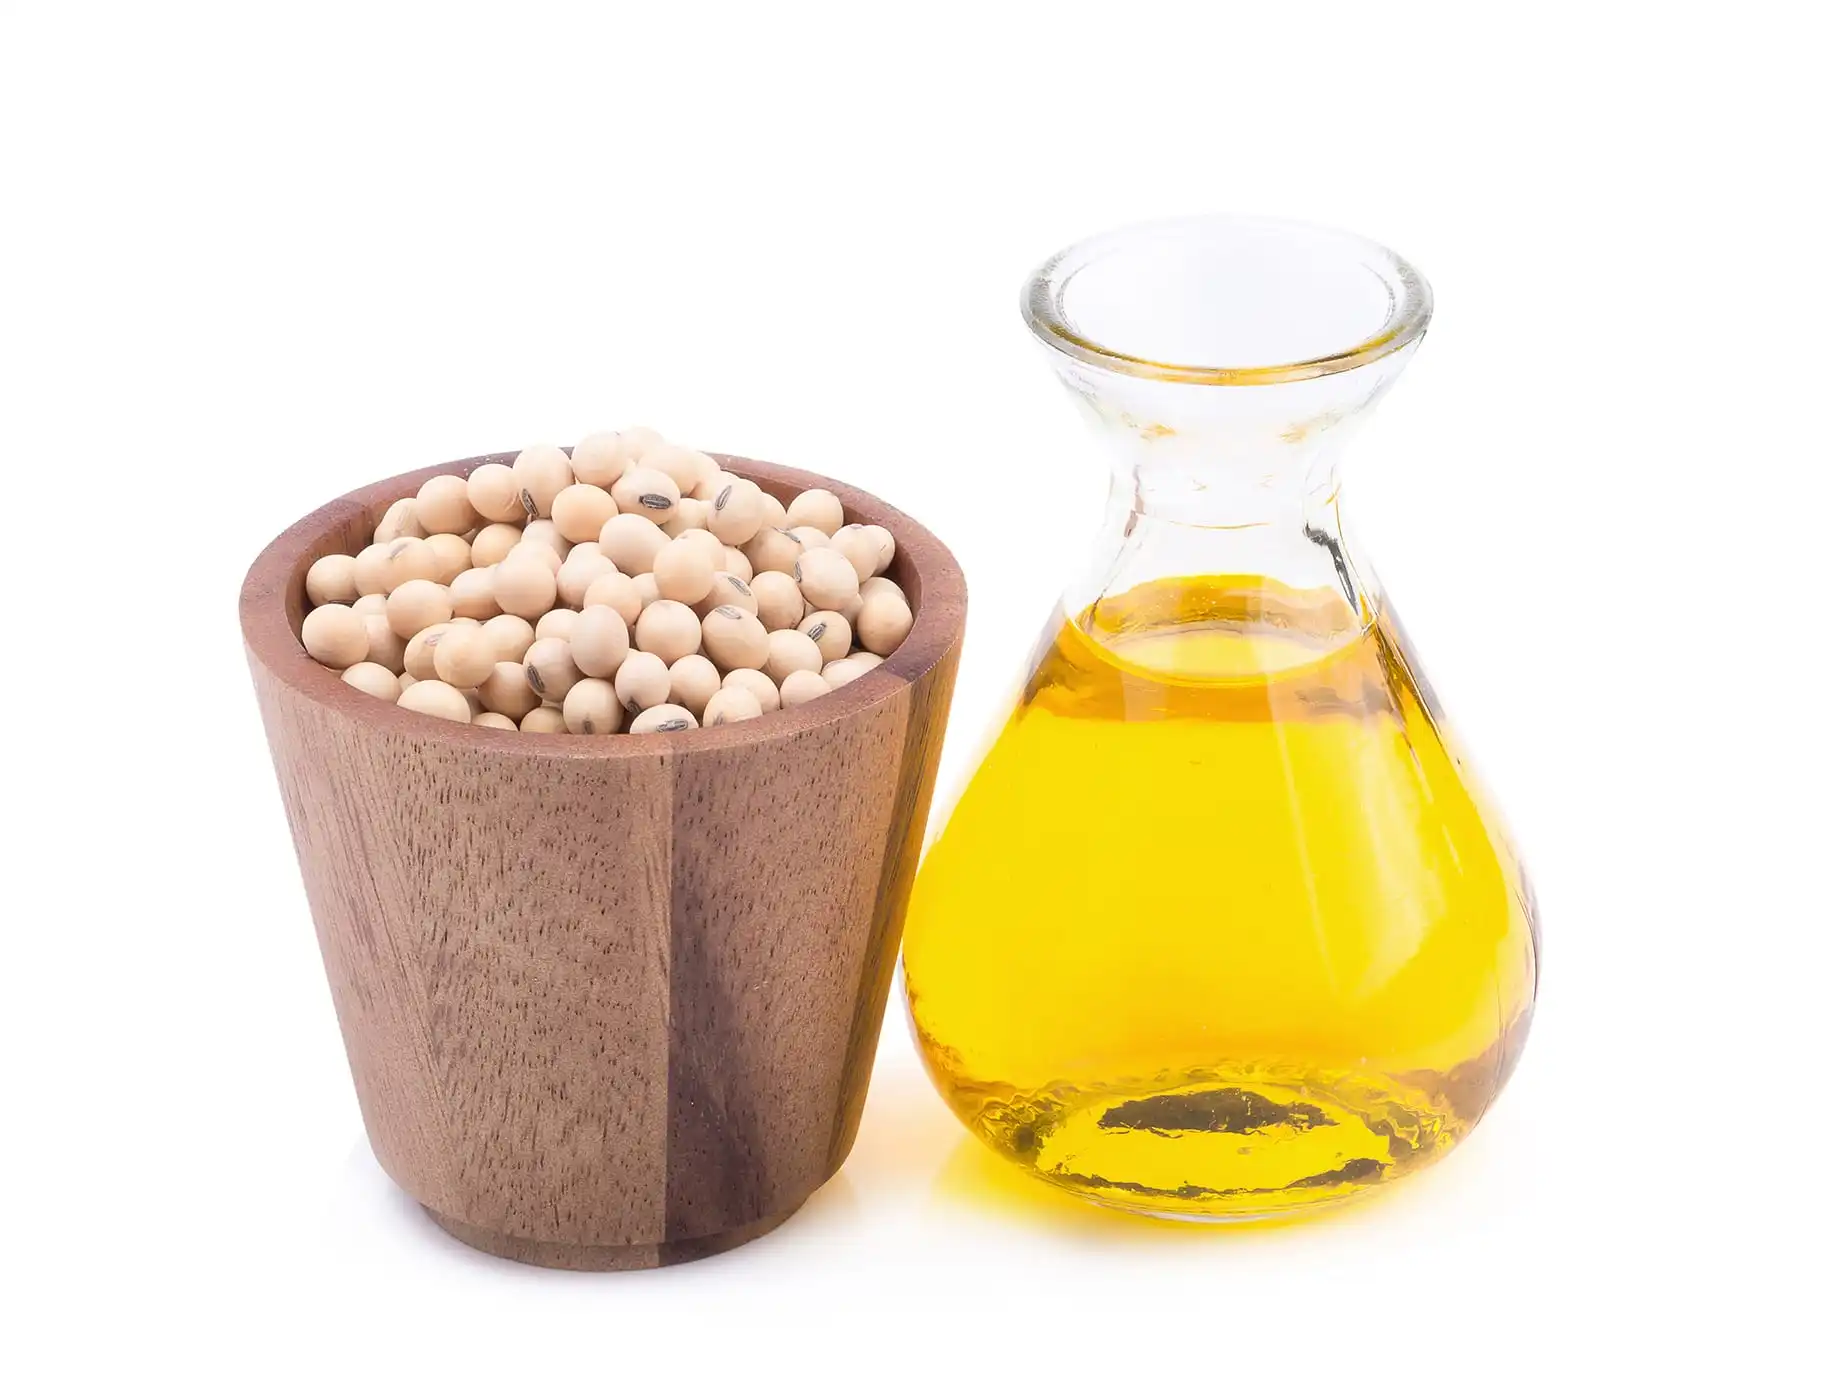 
Refined Soybeans Oil 